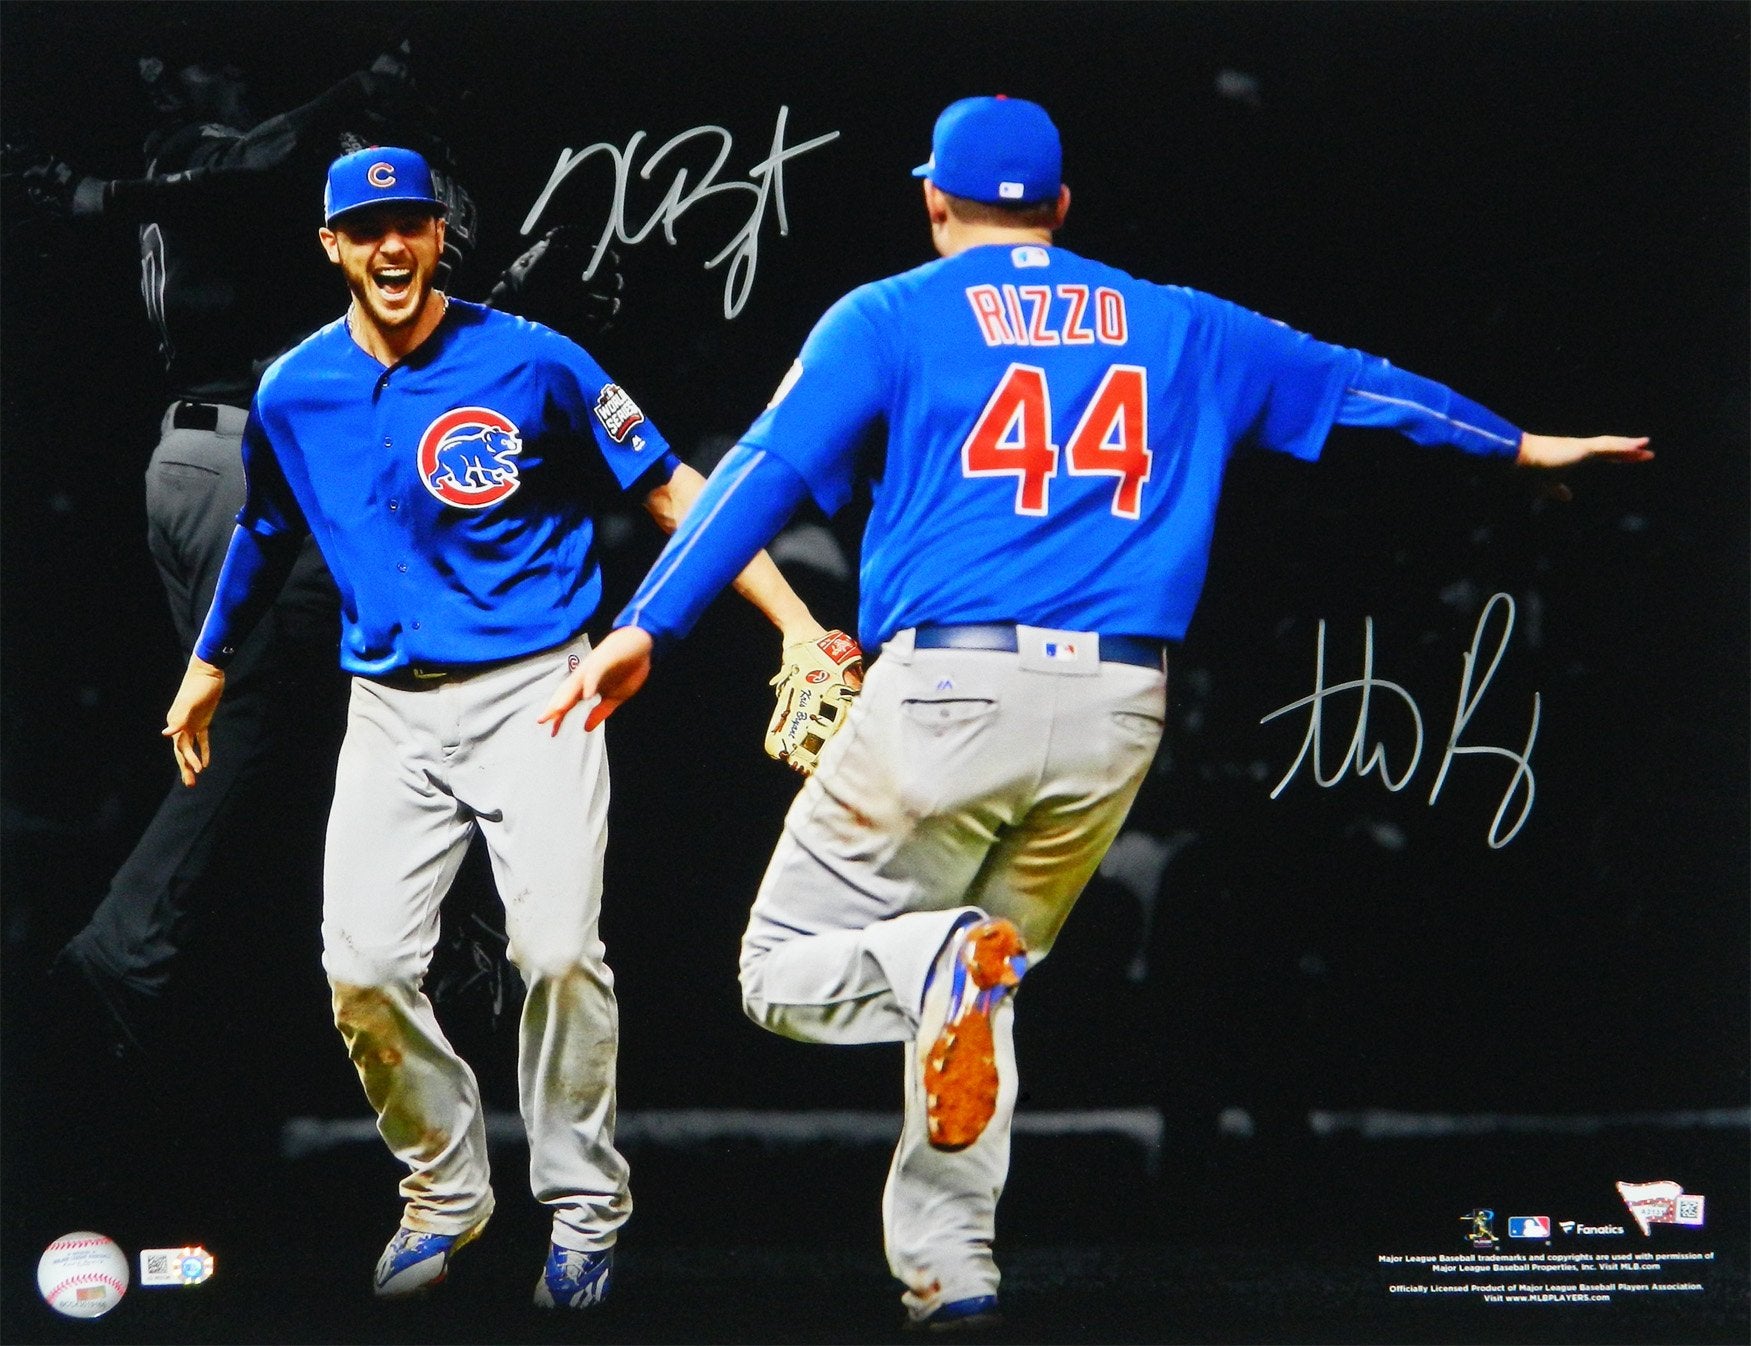 Chicago Cubs Autographs - Are you a Gambling Man? Time to bet on the Chicago Cubs…Autographs that is